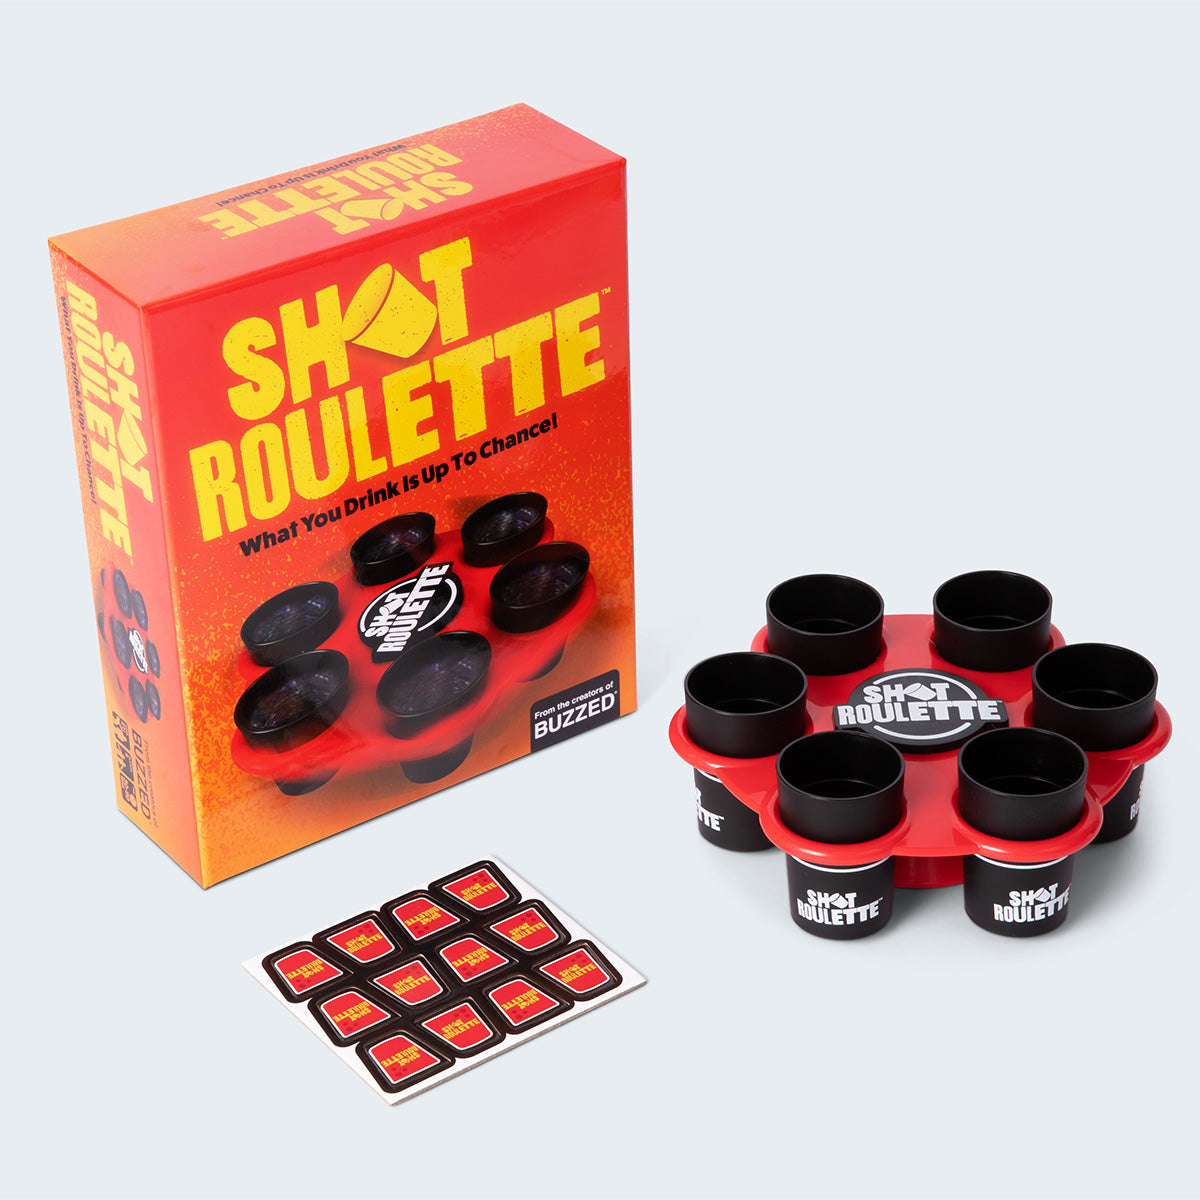 Shot Roulette: A Drinking Game For Friends That Tests Your Poker Face